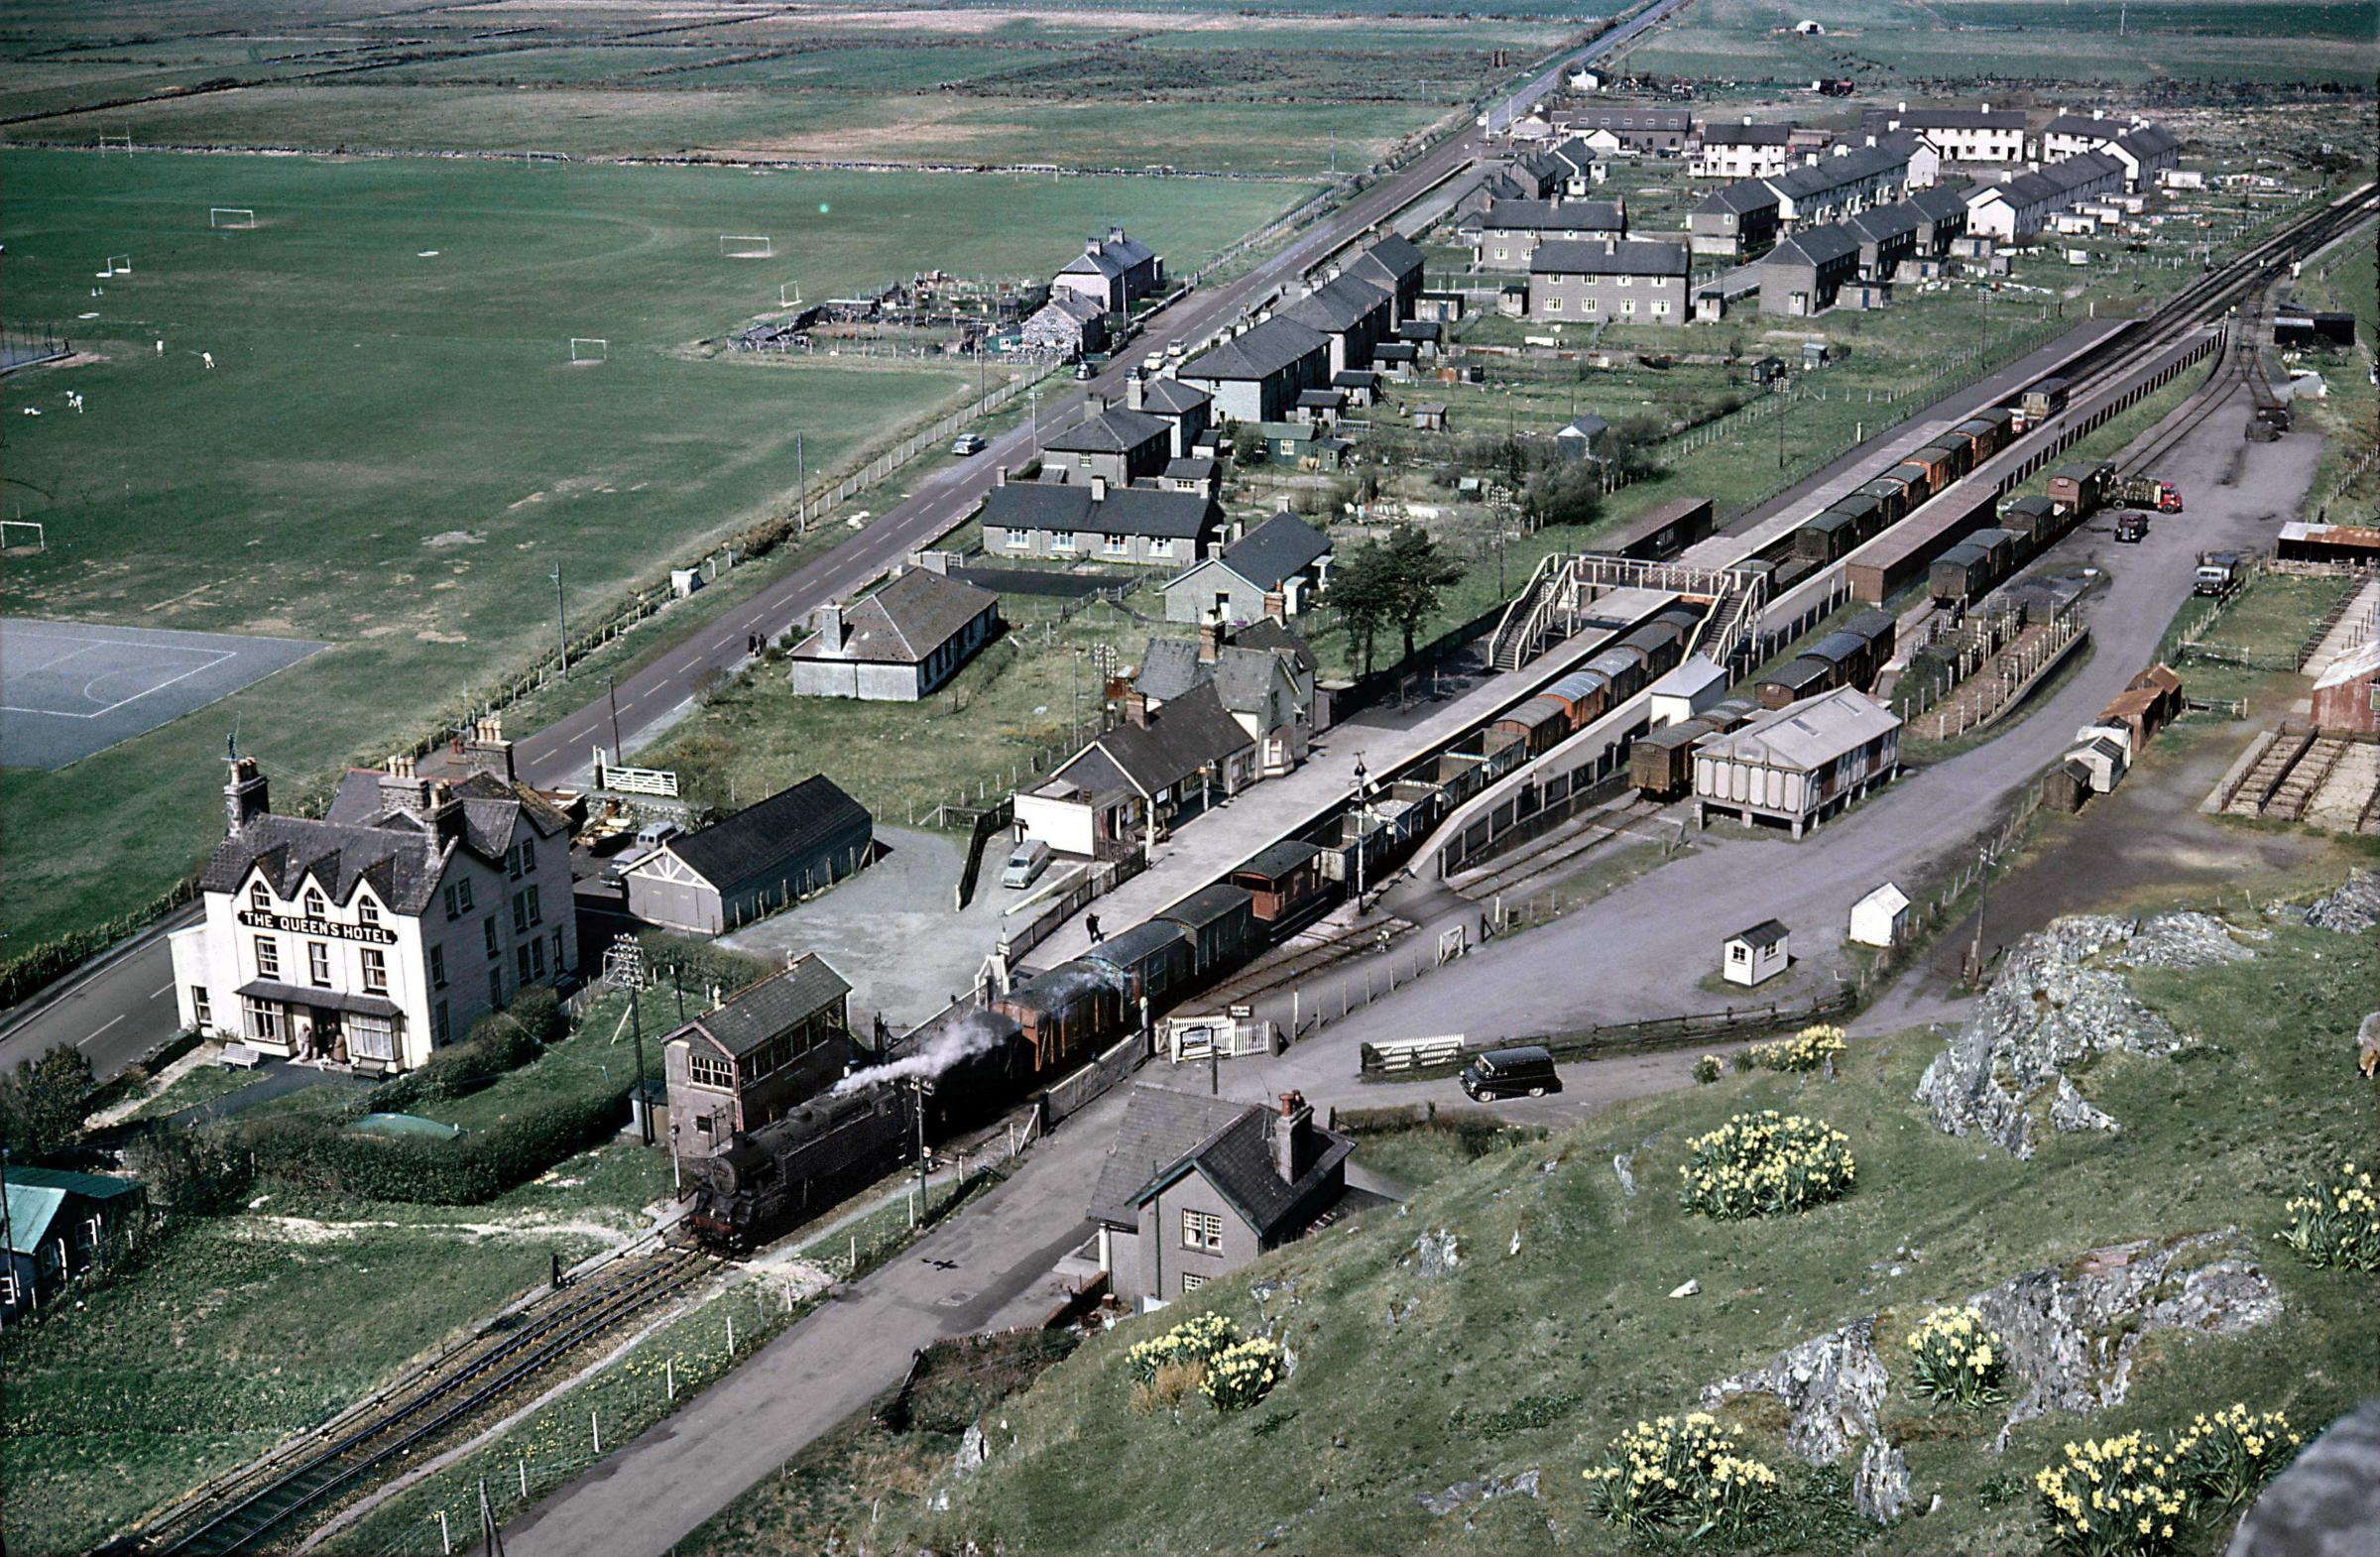 Harlech station. Image courtesy of Michael Clemens